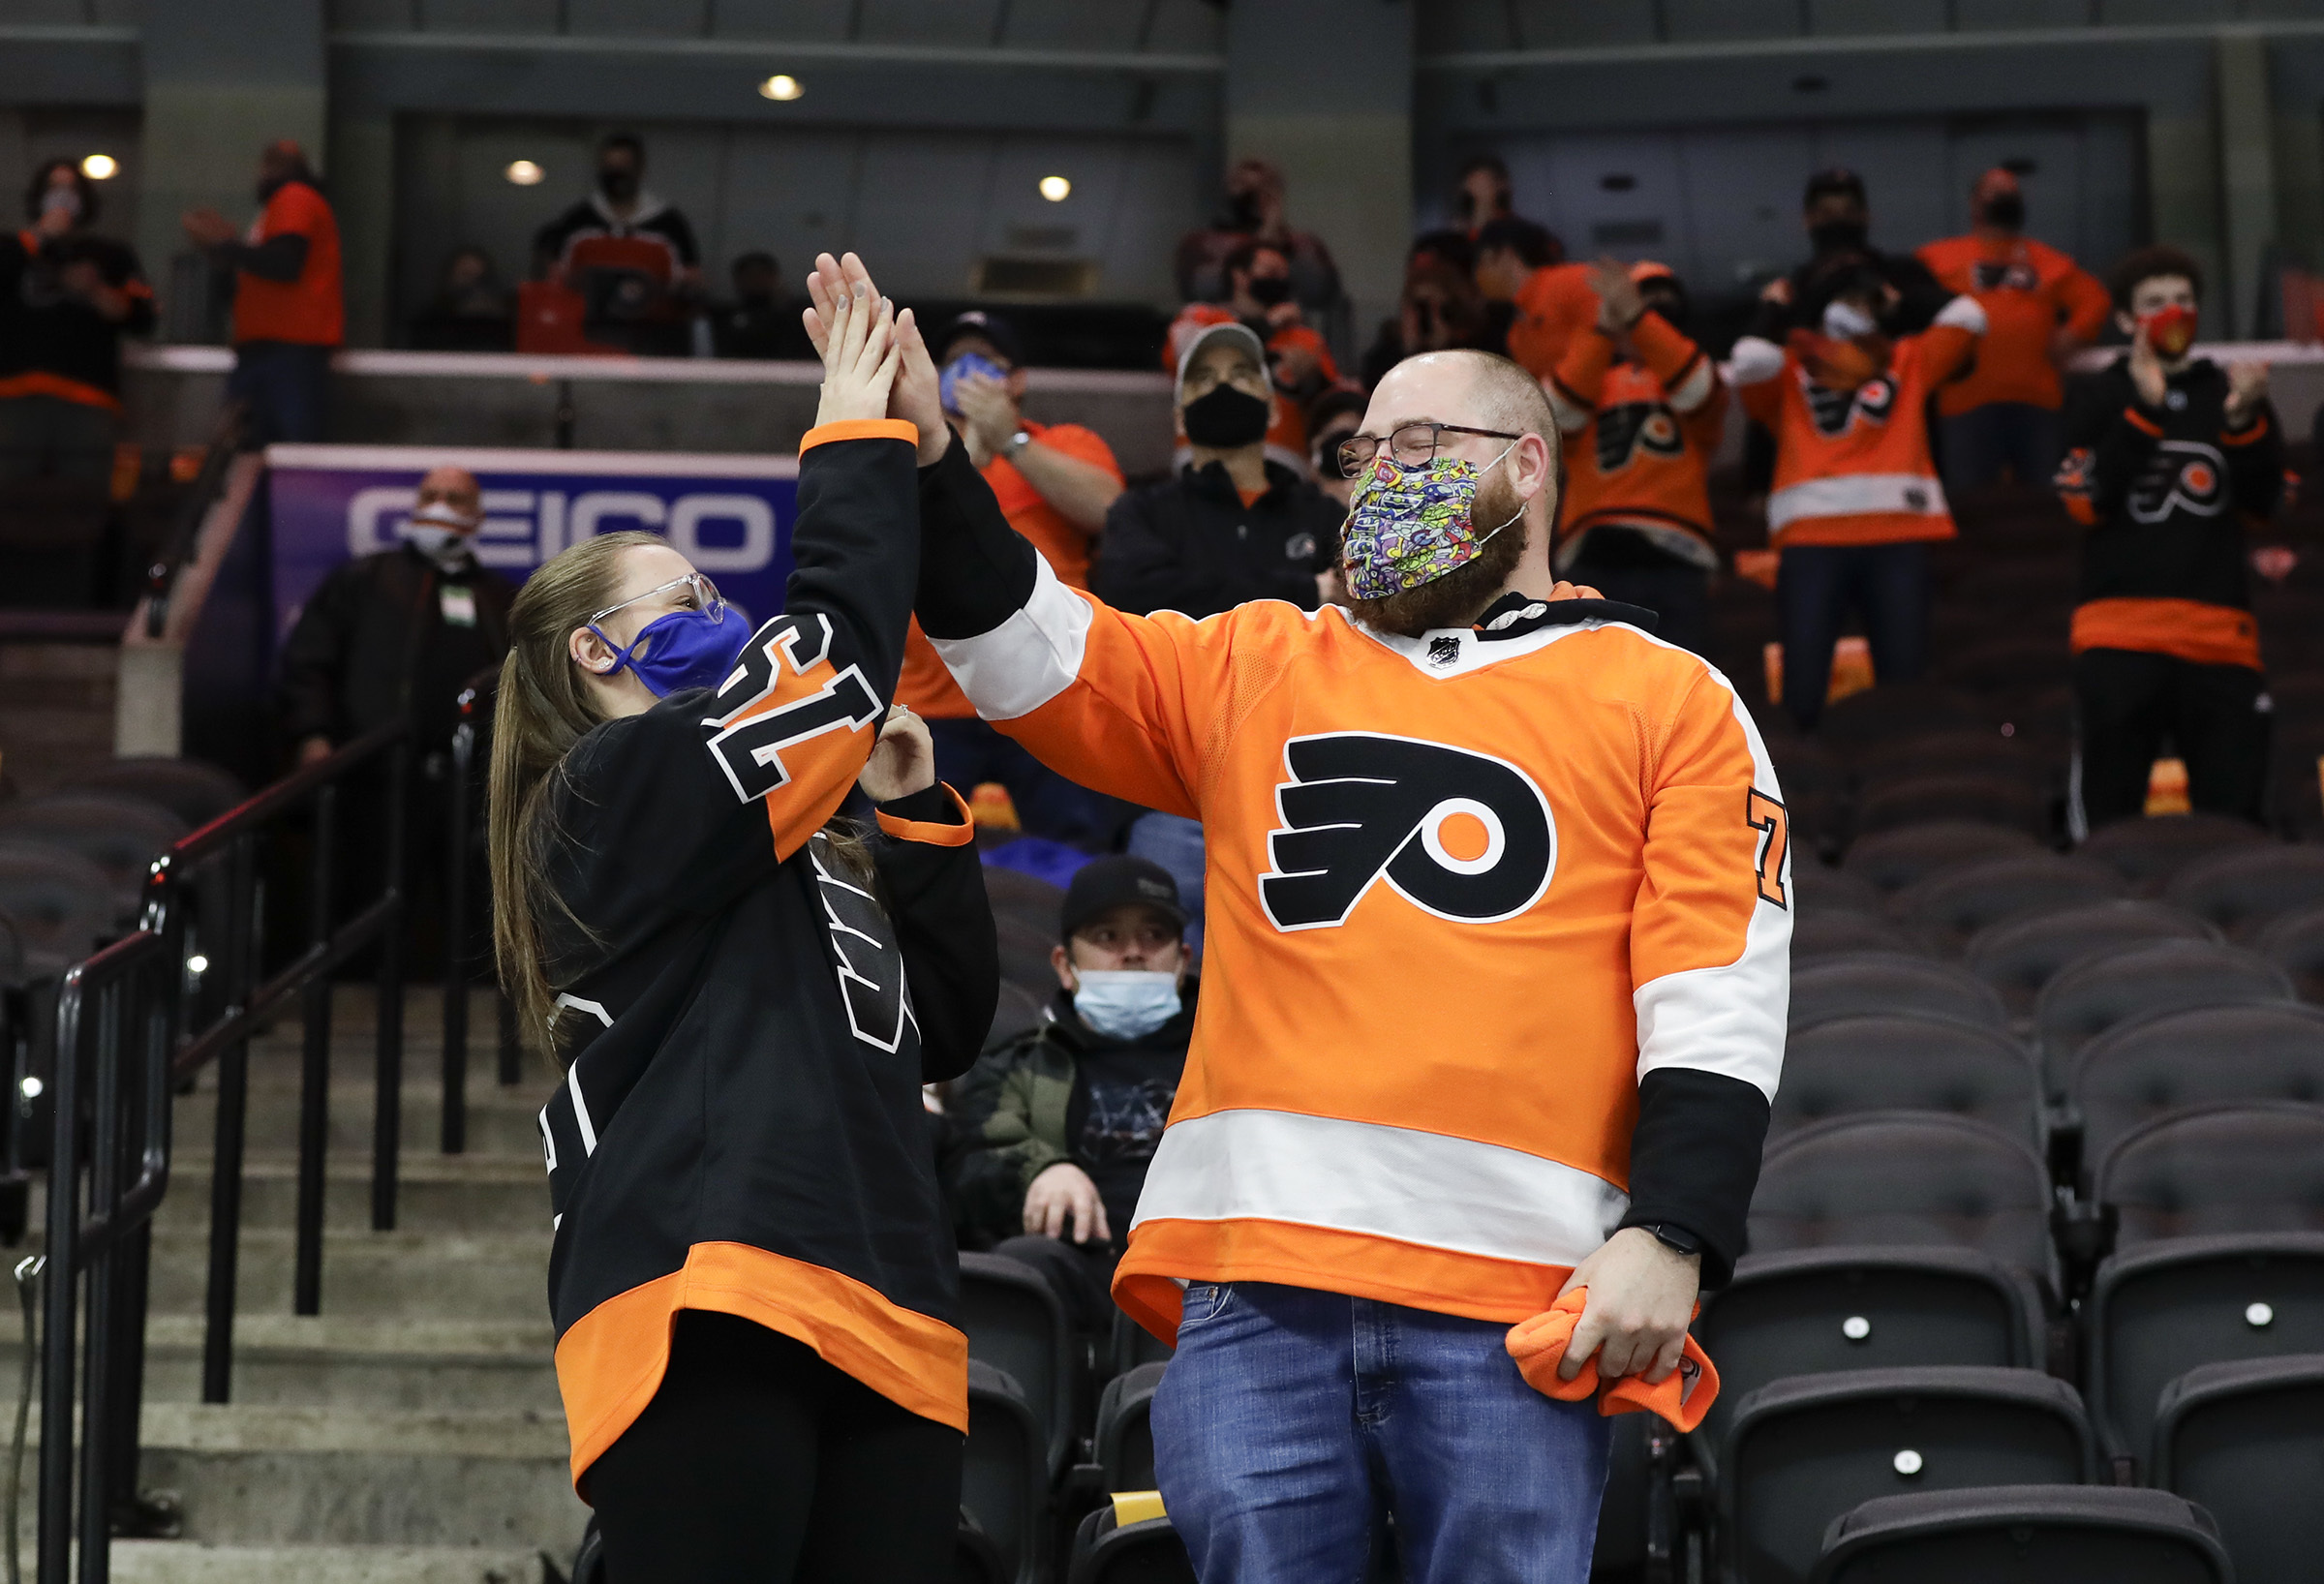 Wells Fargo Center puts fans back in the game - WHYY